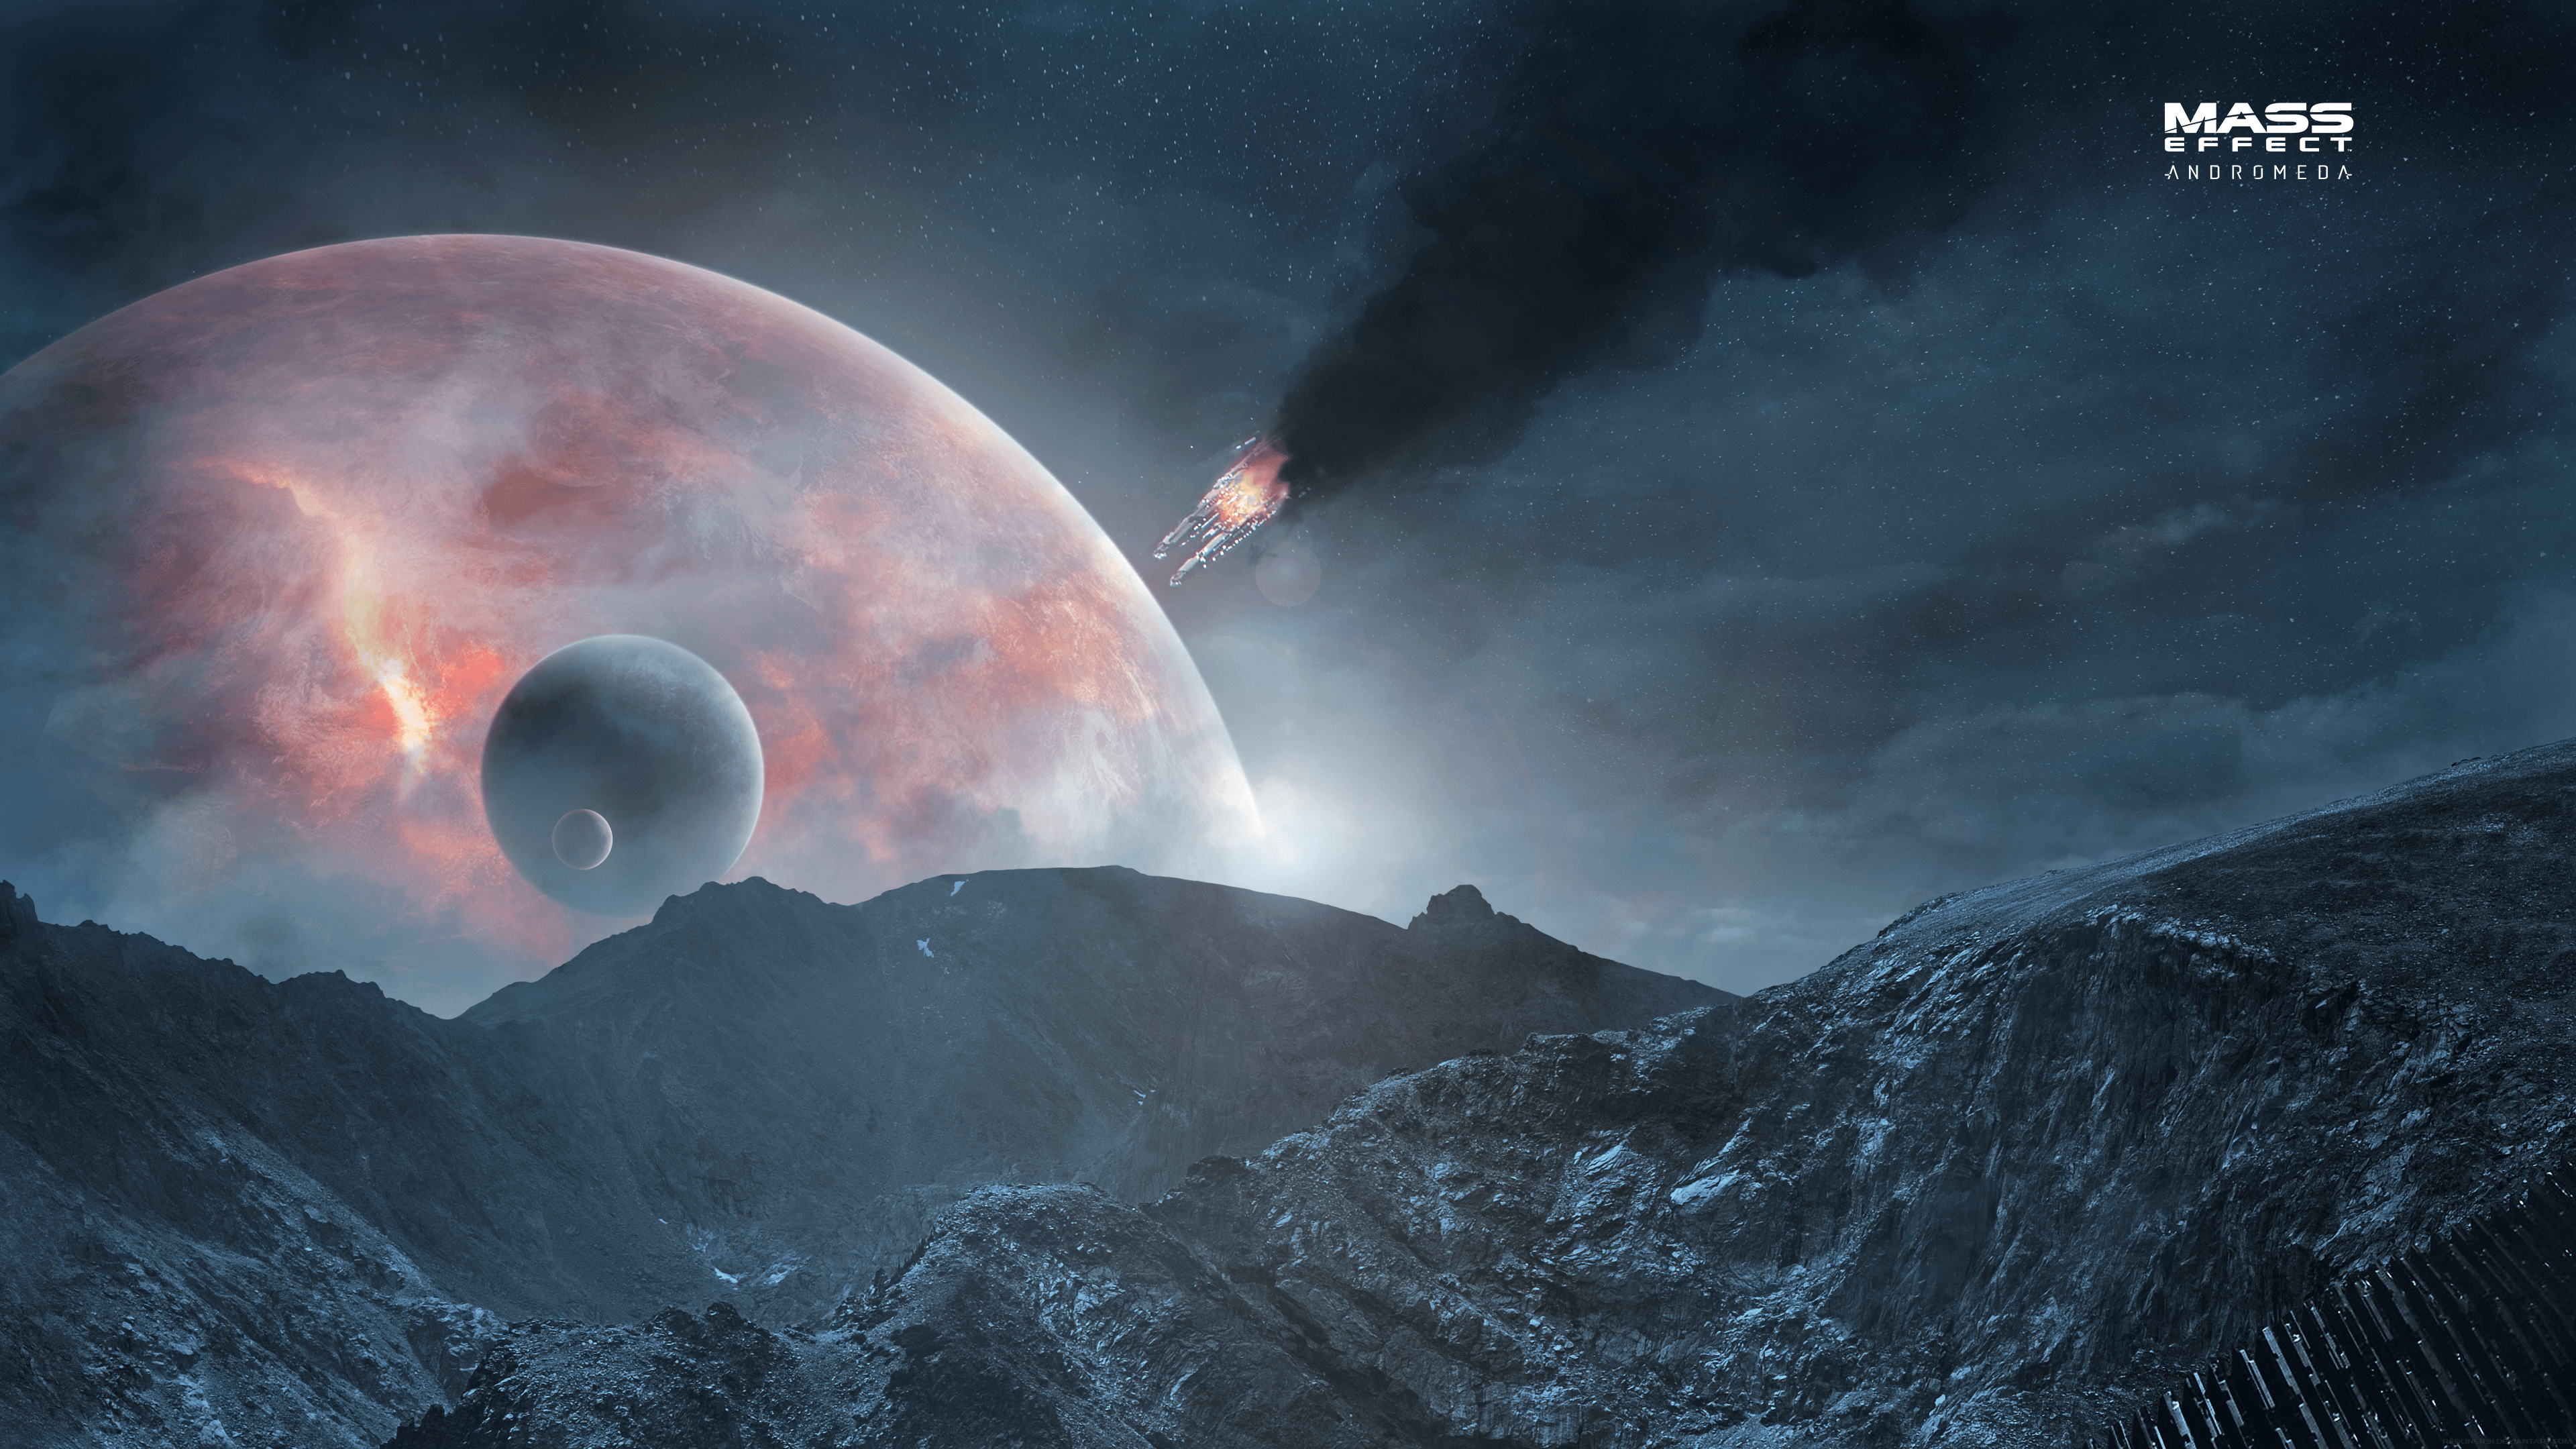 4k Astronomy Wallpapers Top Free 4k Astronomy Backgrounds Wallpaperaccess 6759